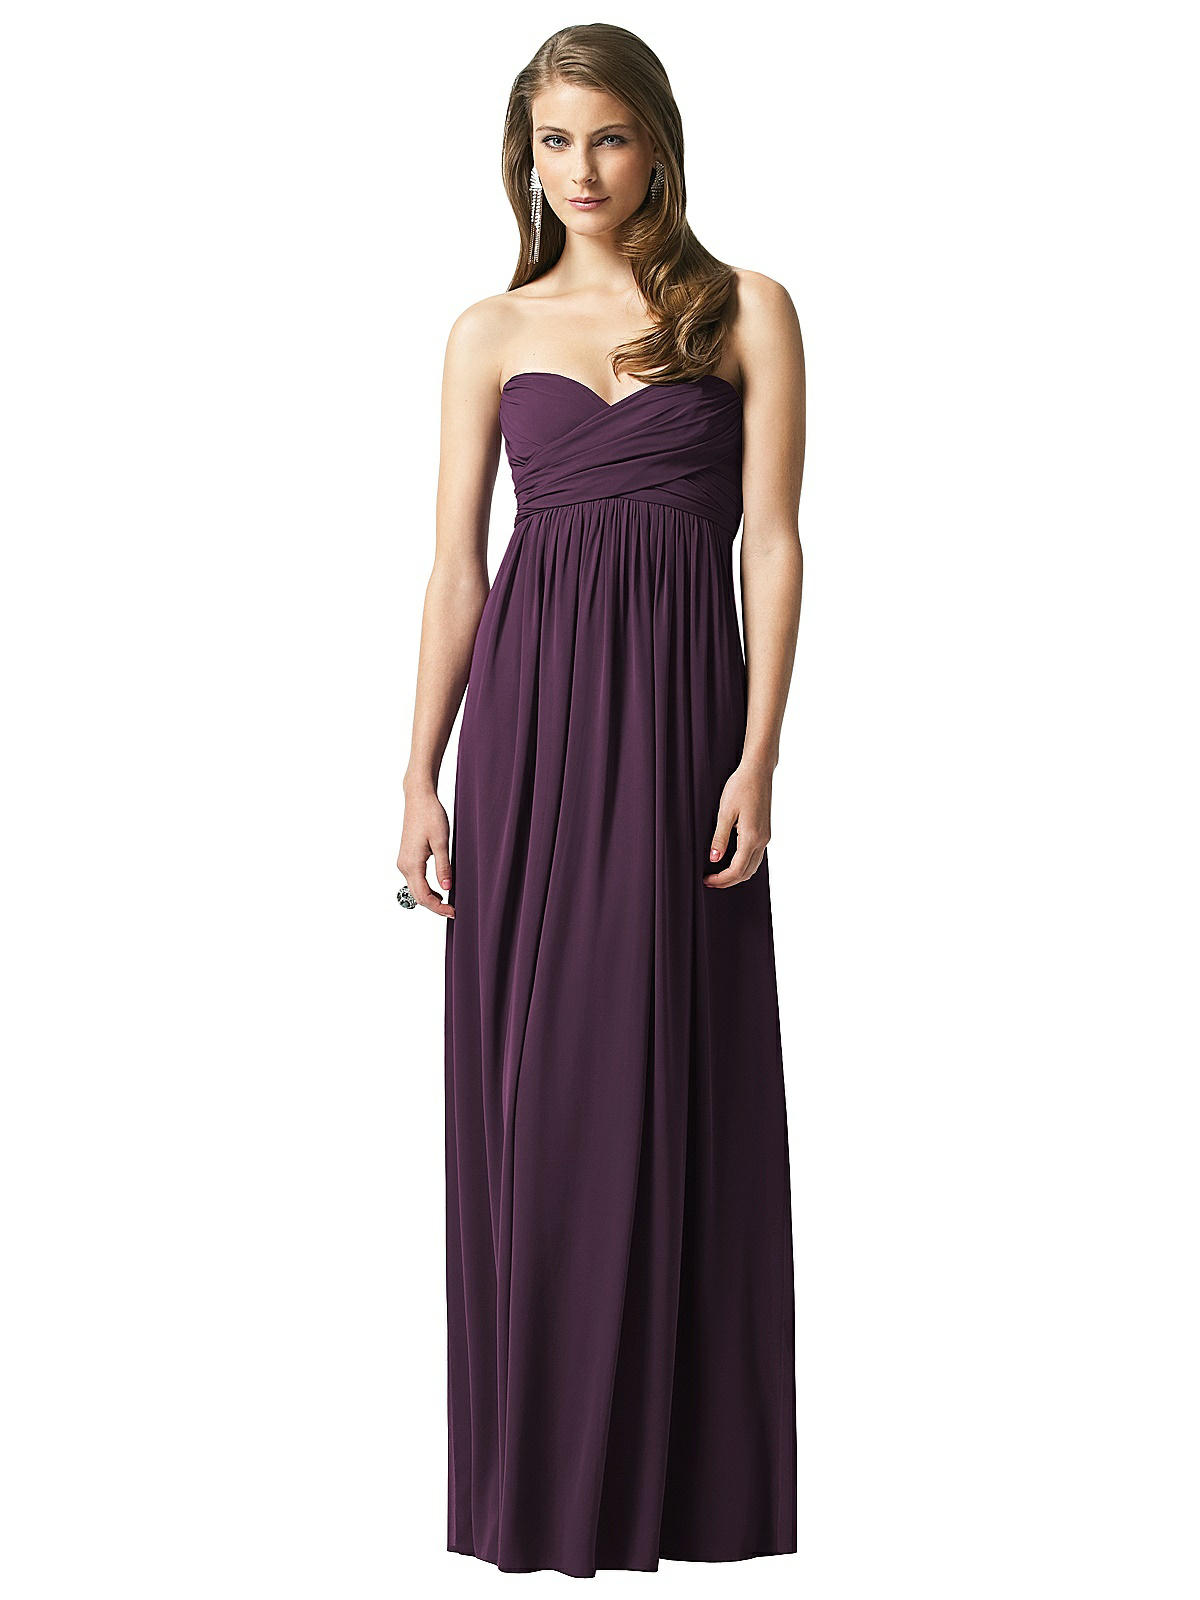 Dessy Collection Style 2846 In Aubergine | The Dessy Group